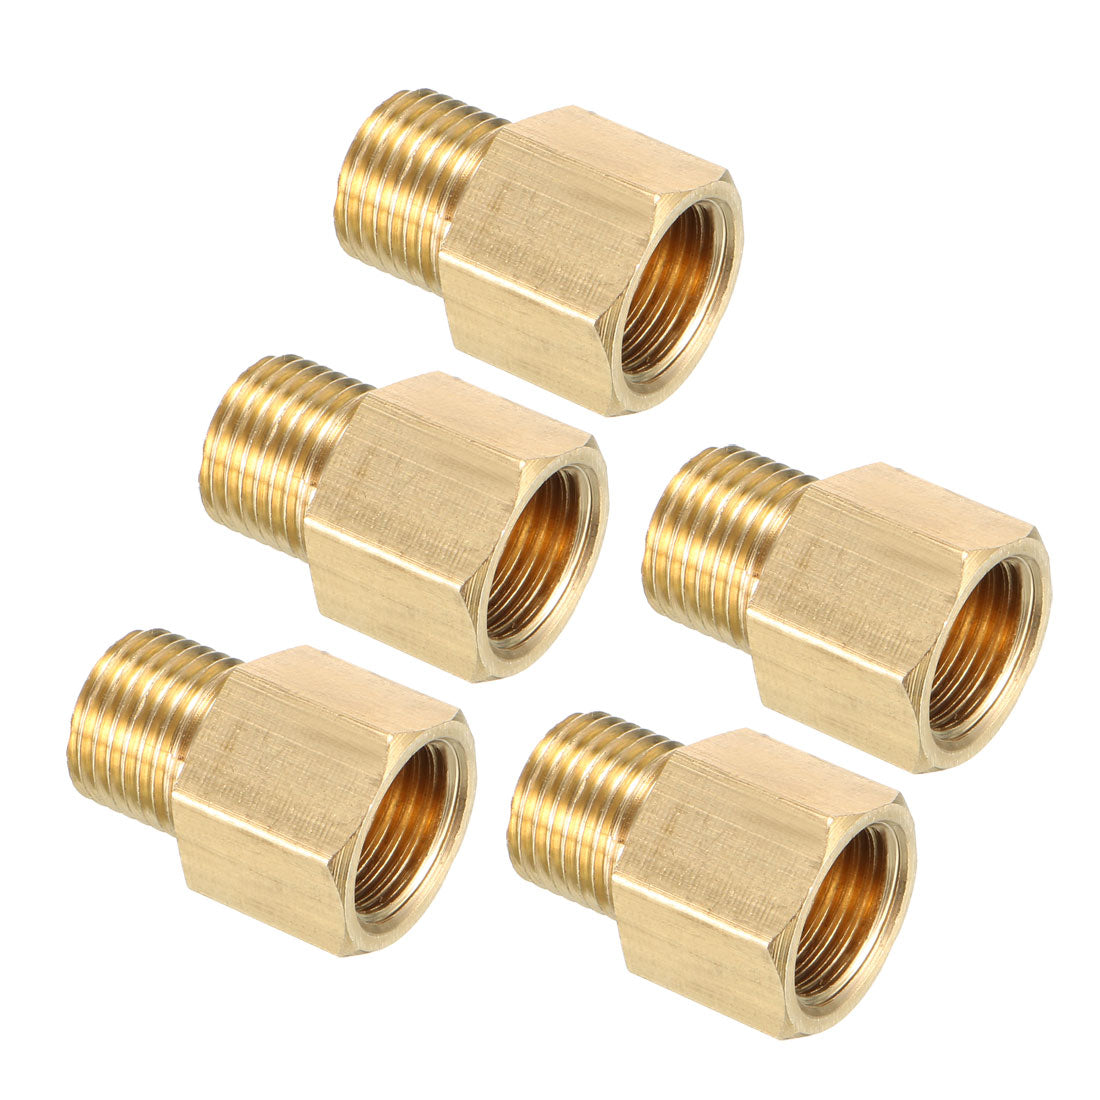 uxcell Uxcell Brass Threaded Pipe Fitting 1/8N PT Male x 1/8N PT Female Adapter 5pcs